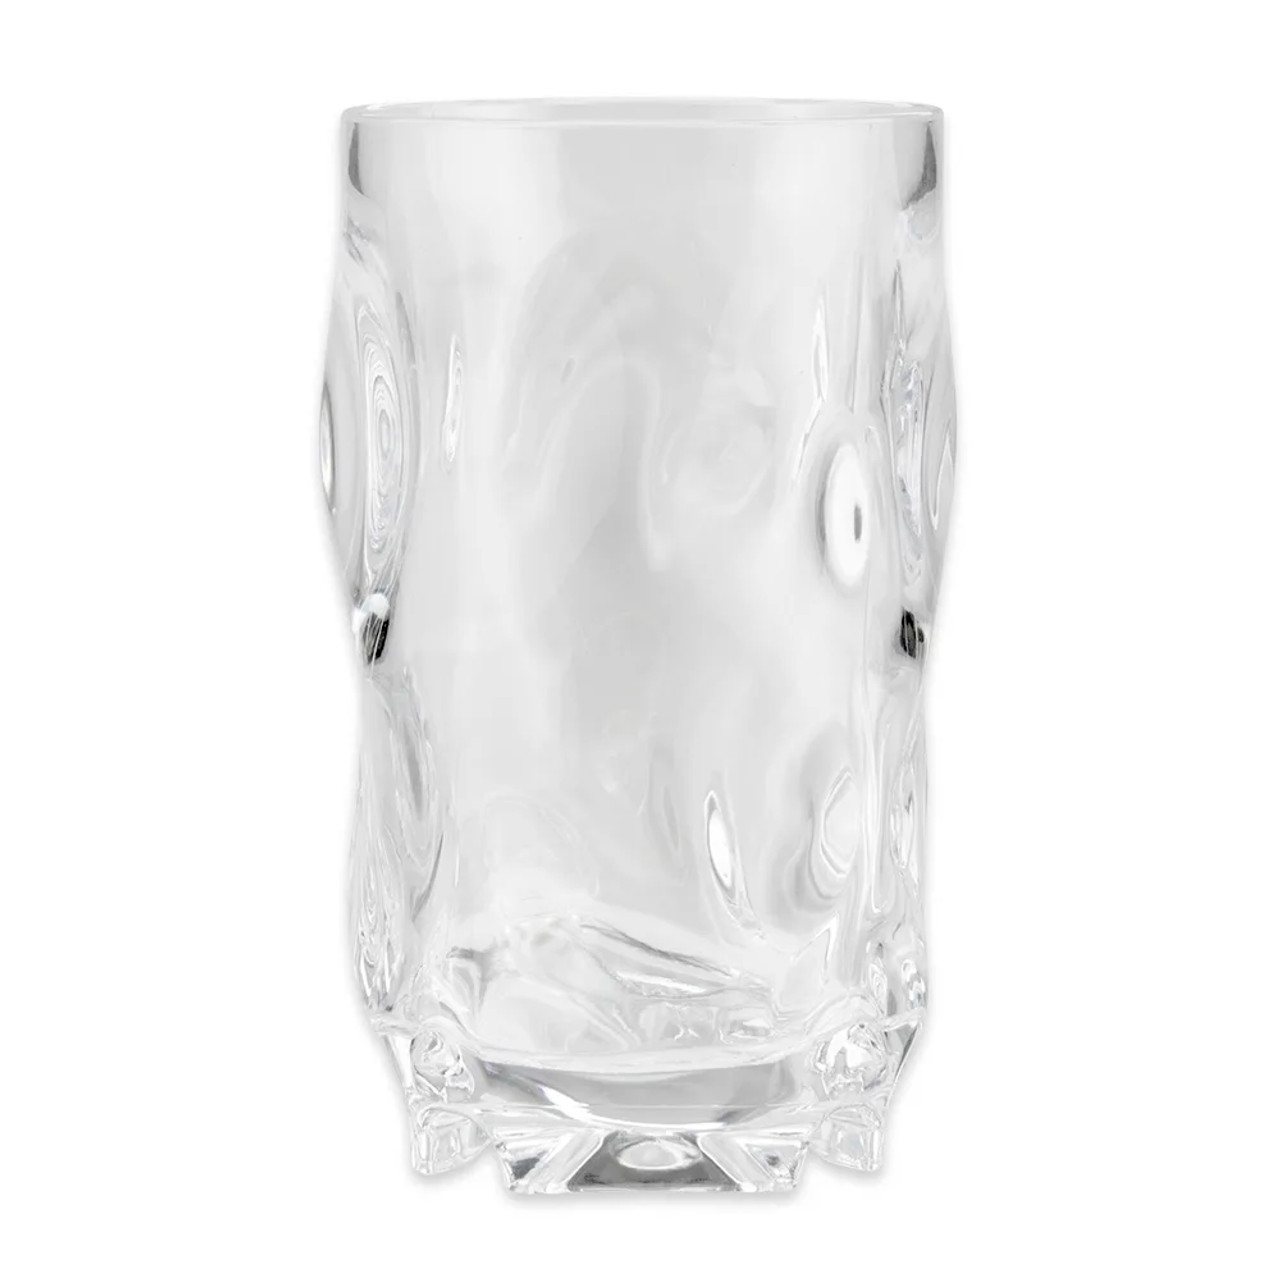 GET 16 oz Clear Plastic Tumbler (24/Case) - Stylish and Durable SAN Material - Chicken Pieces